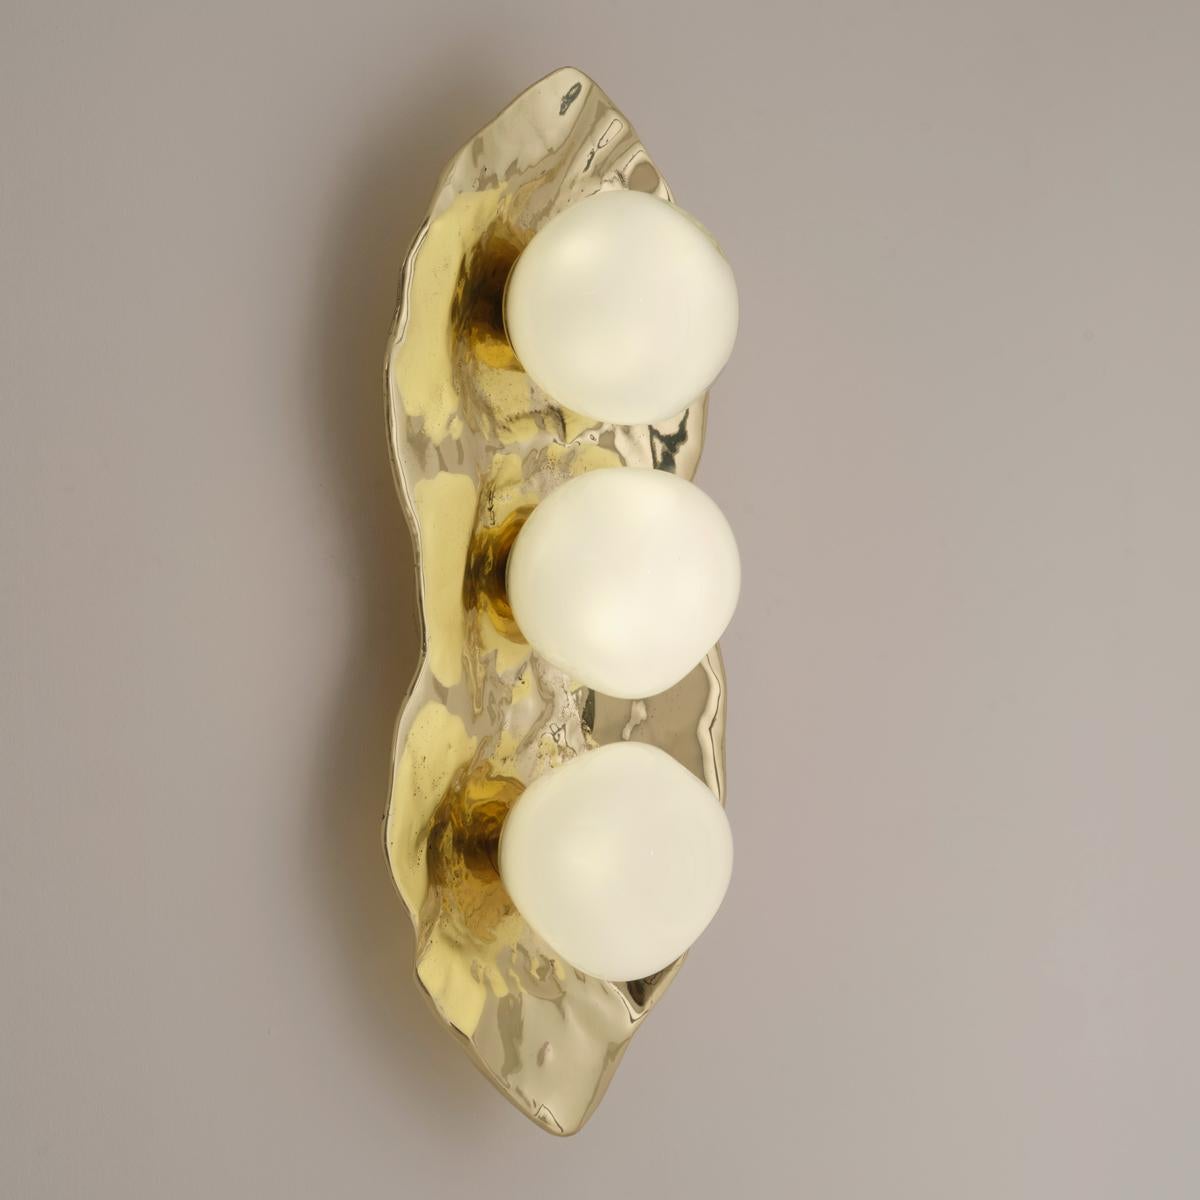 Shell Wall Light by Gaspare Asaro-Polished Nickel Finish In New Condition For Sale In New York, NY